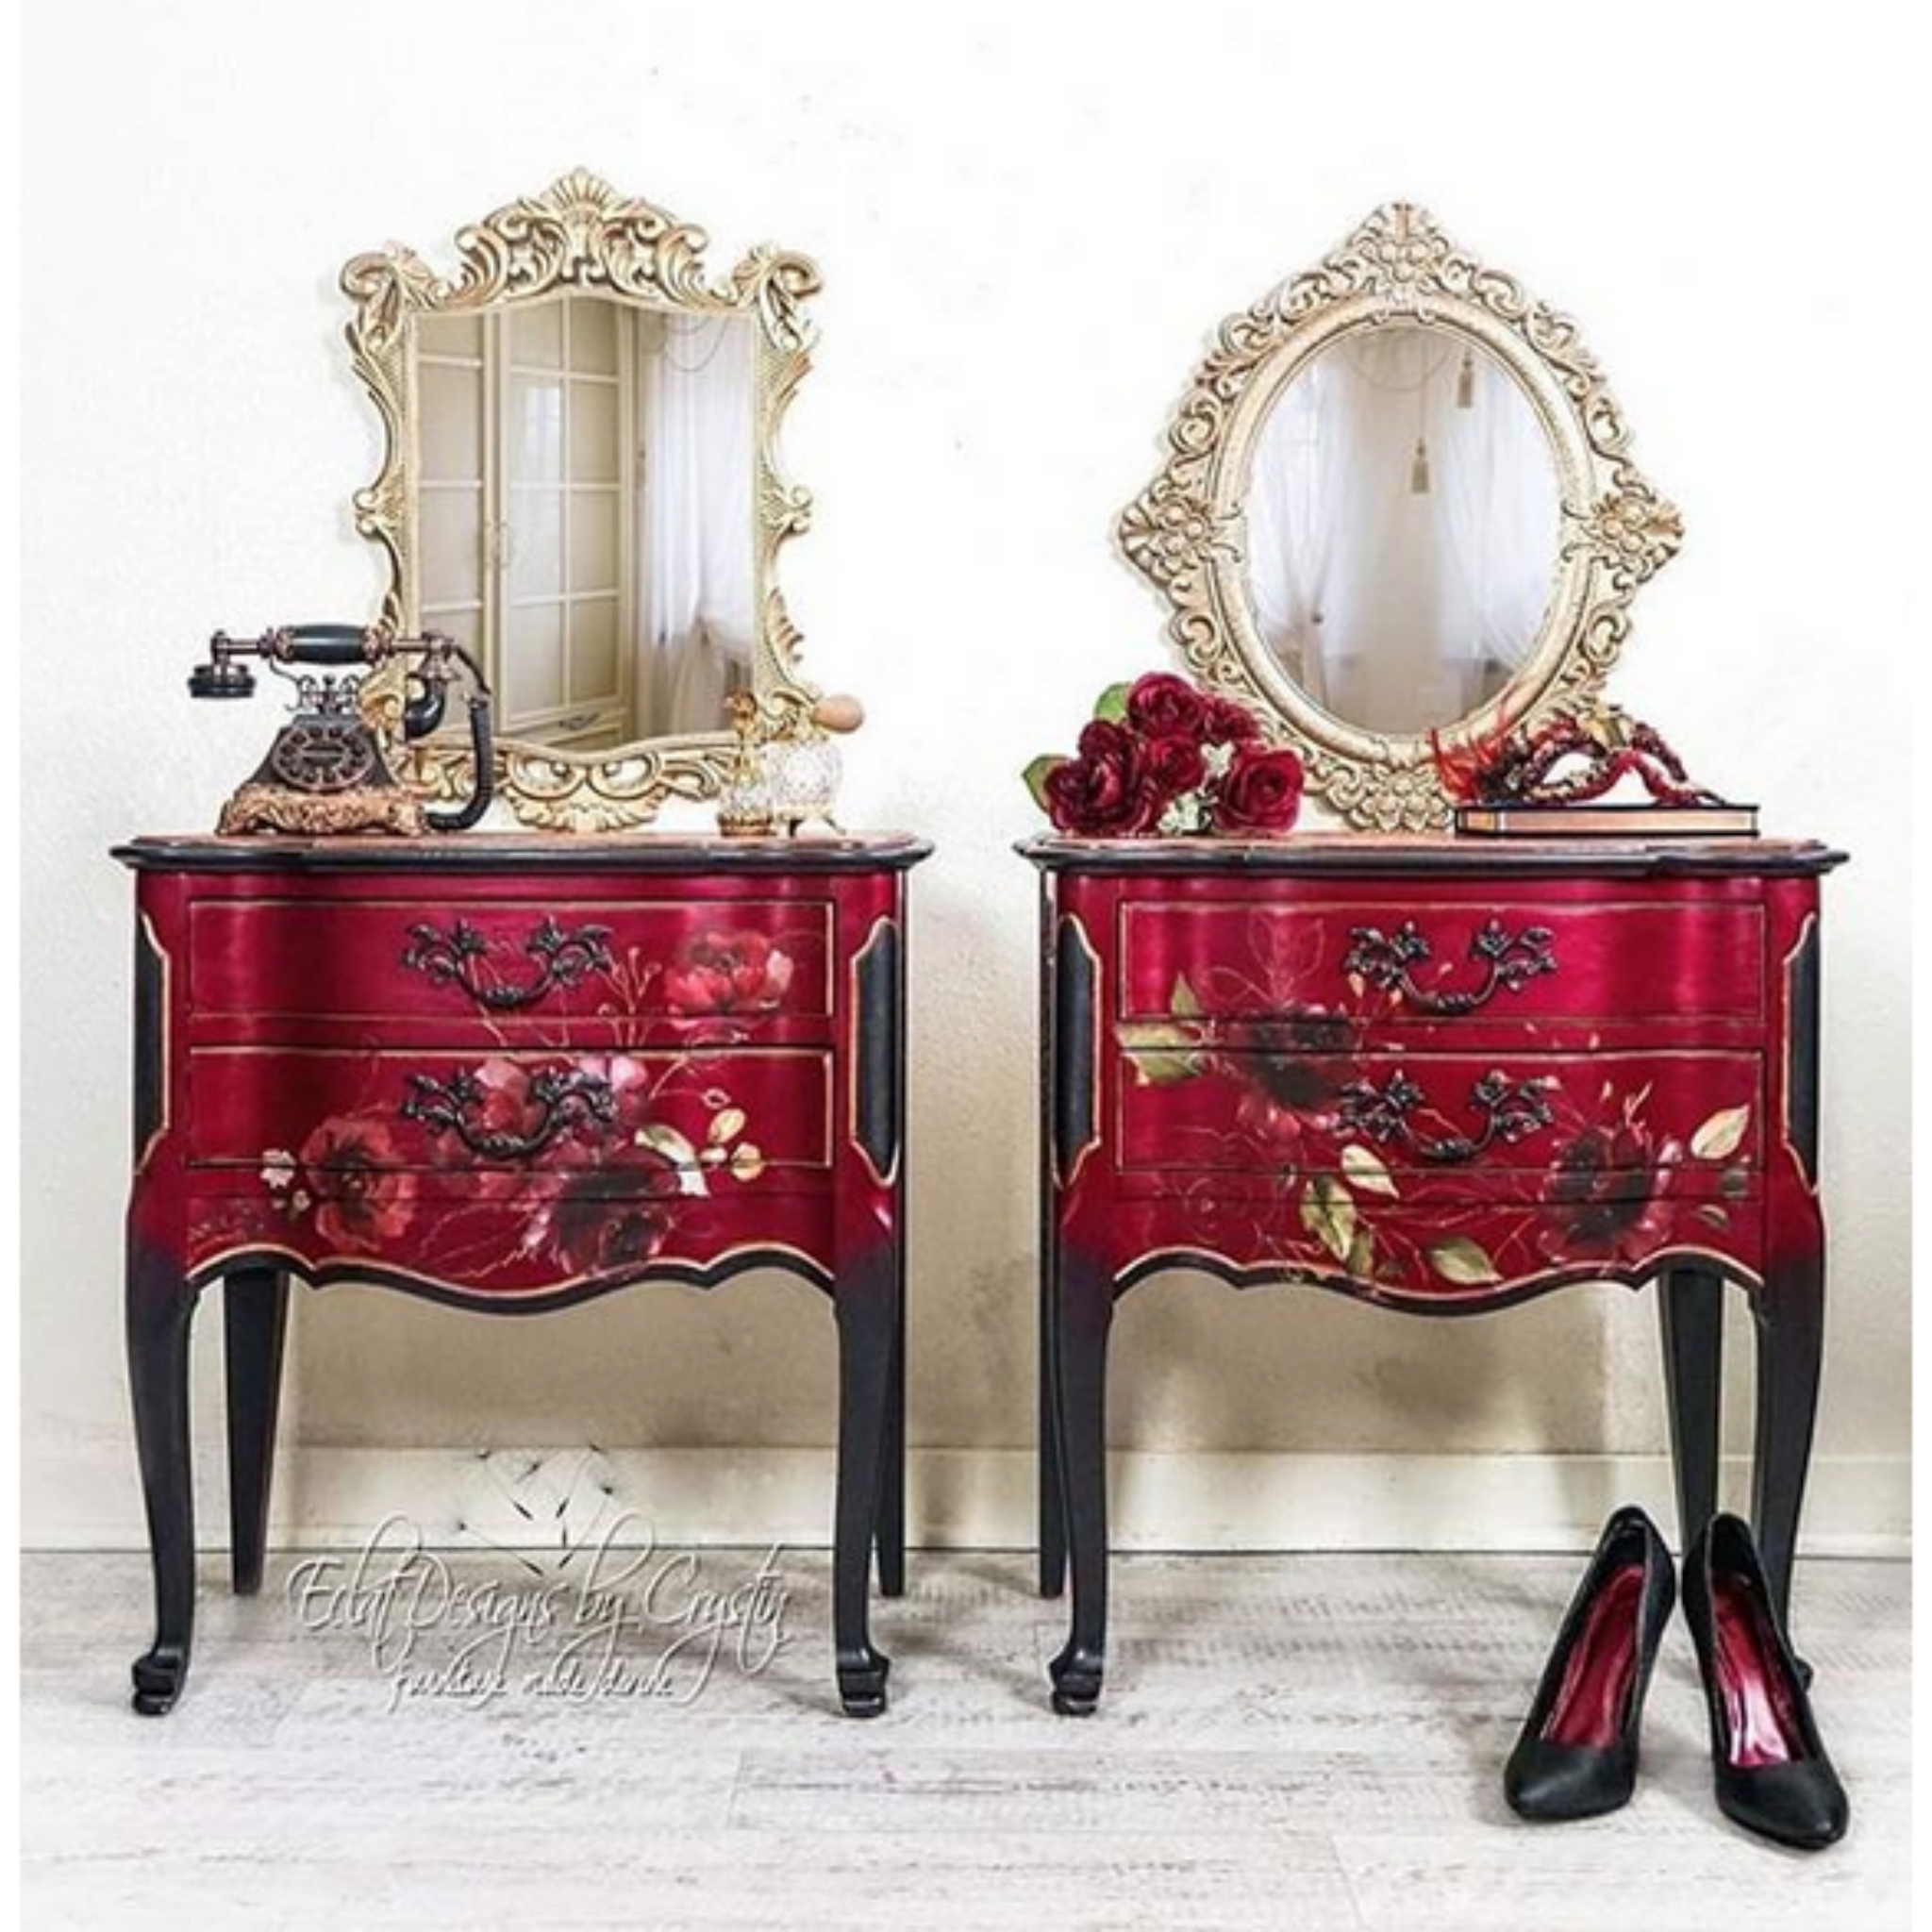 Two red vanities with the Midnight Floral transfer on top. A white Eclat Designs by Crystin logo on the bottom left.